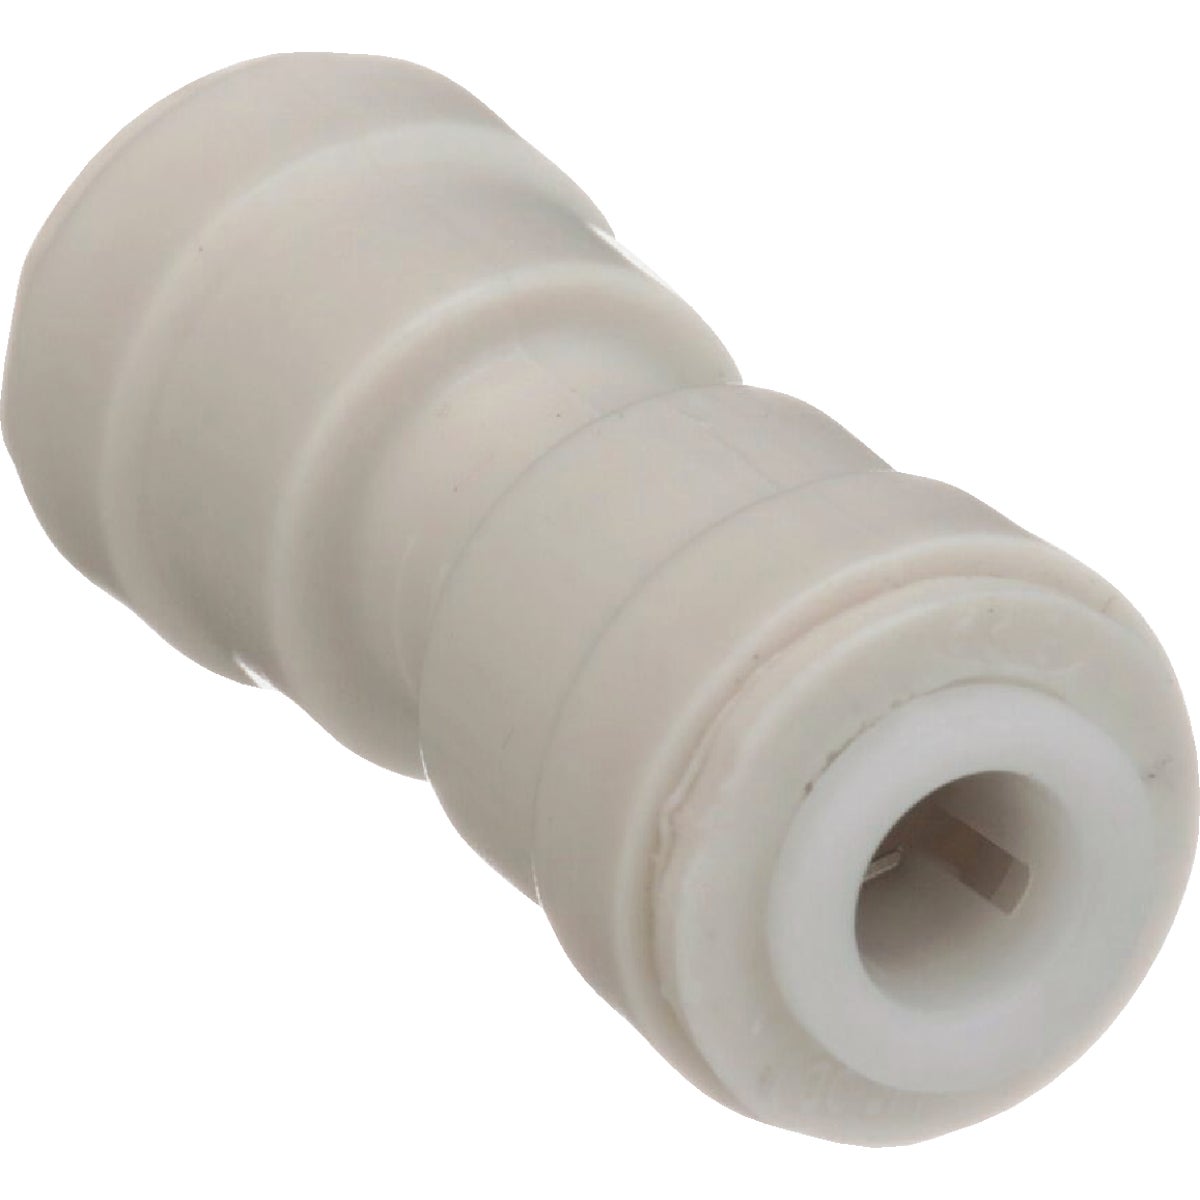 Watts Aqualock 1/4 In. x 1/4 In. Push-to-Connect Plastic Coupling